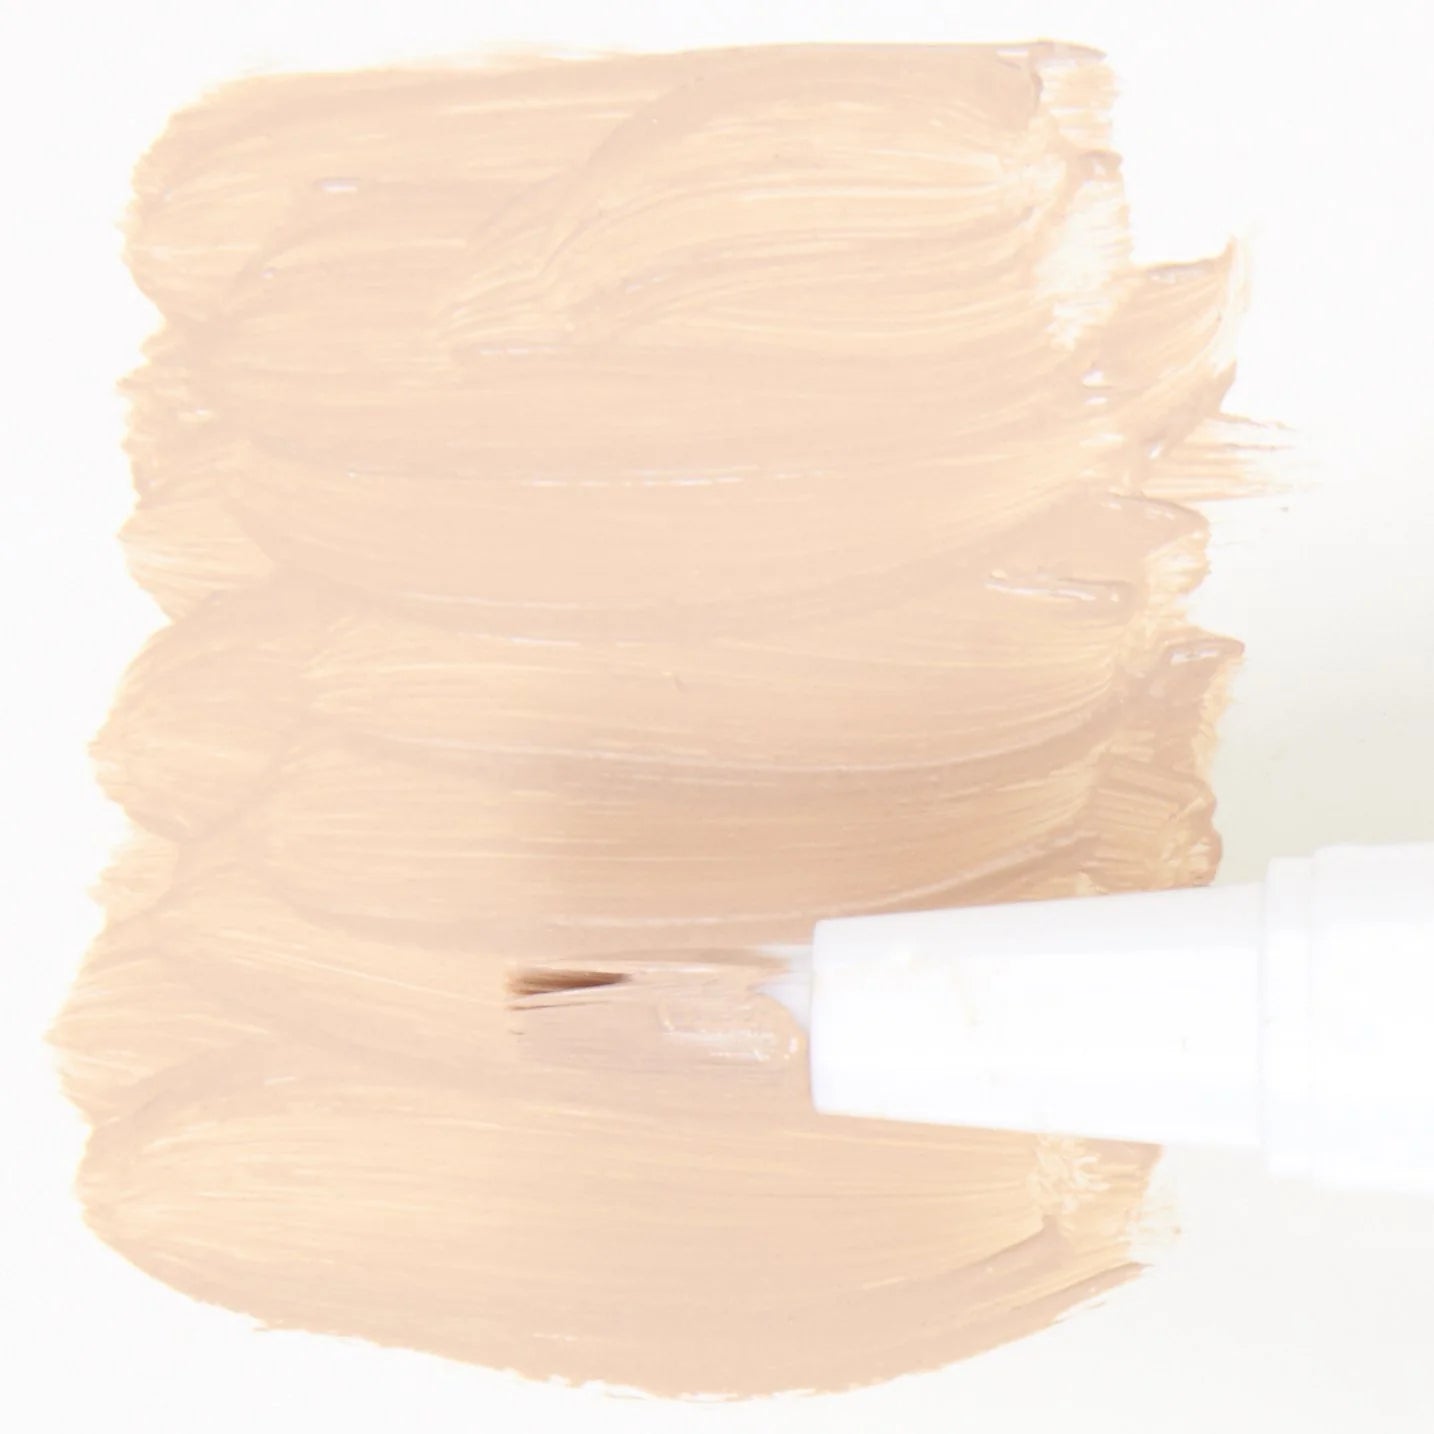 Anti-Aging Mineral Mystique-Hydrating Concealer